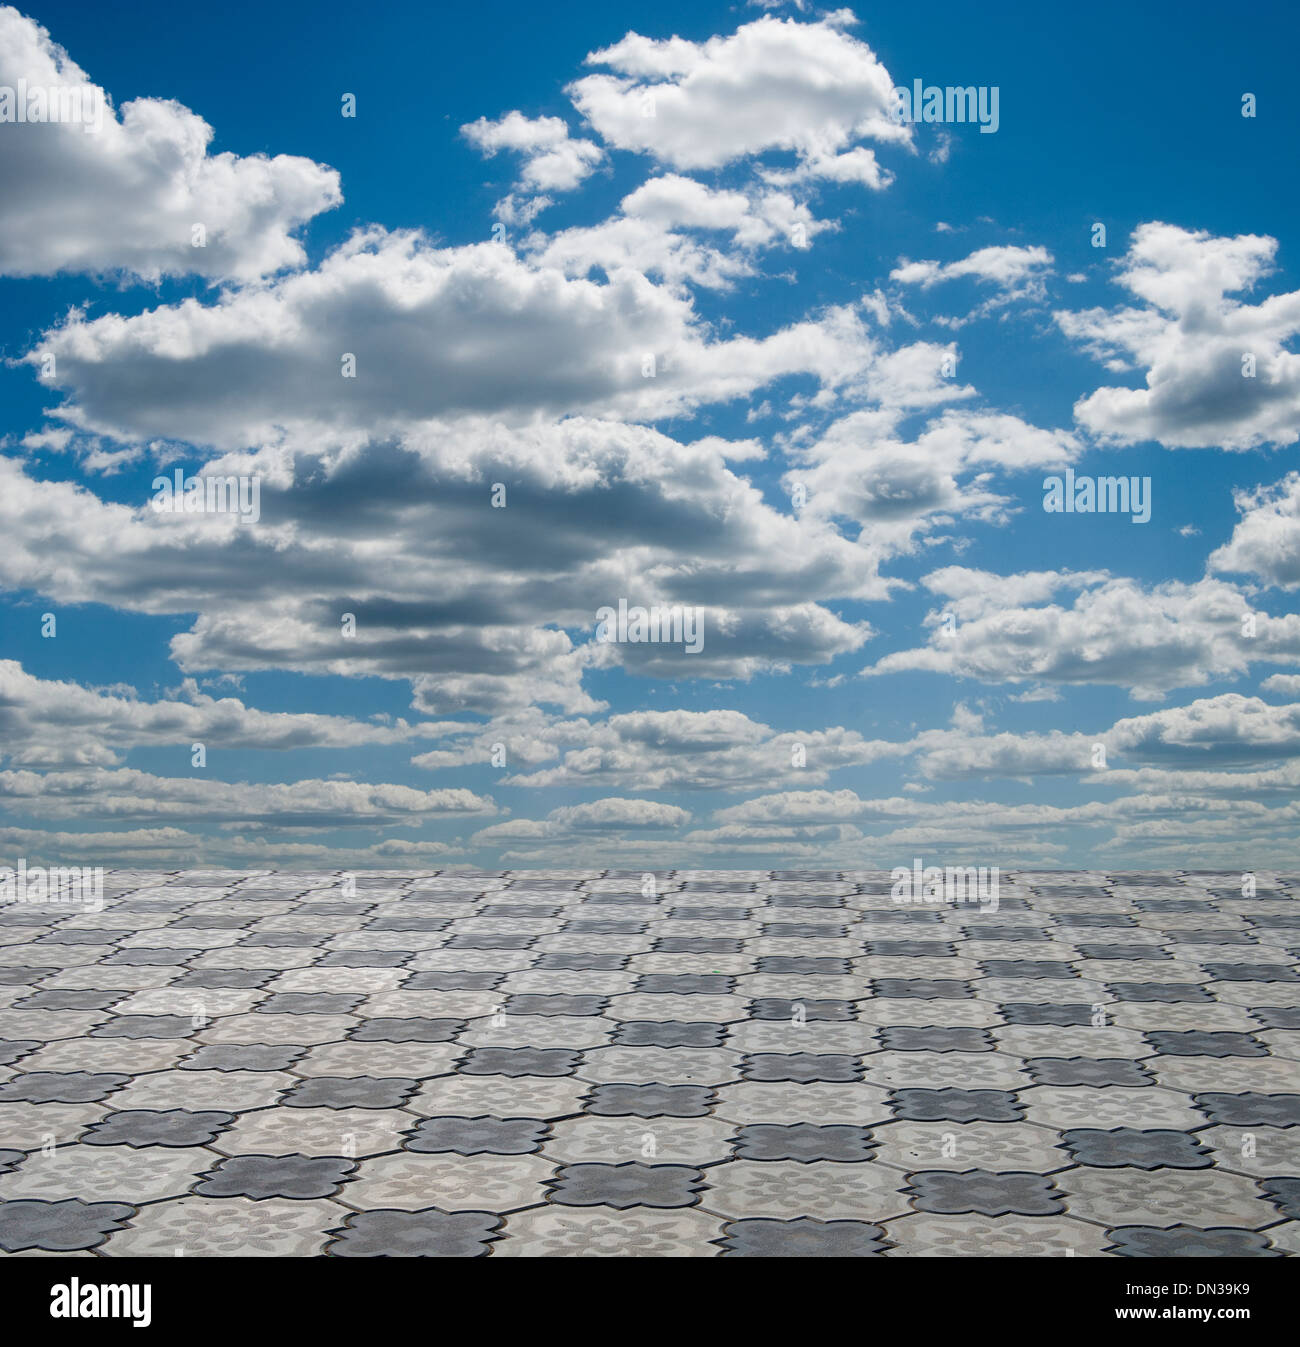 Blue sky and gray ground perspective view. Stock Photo